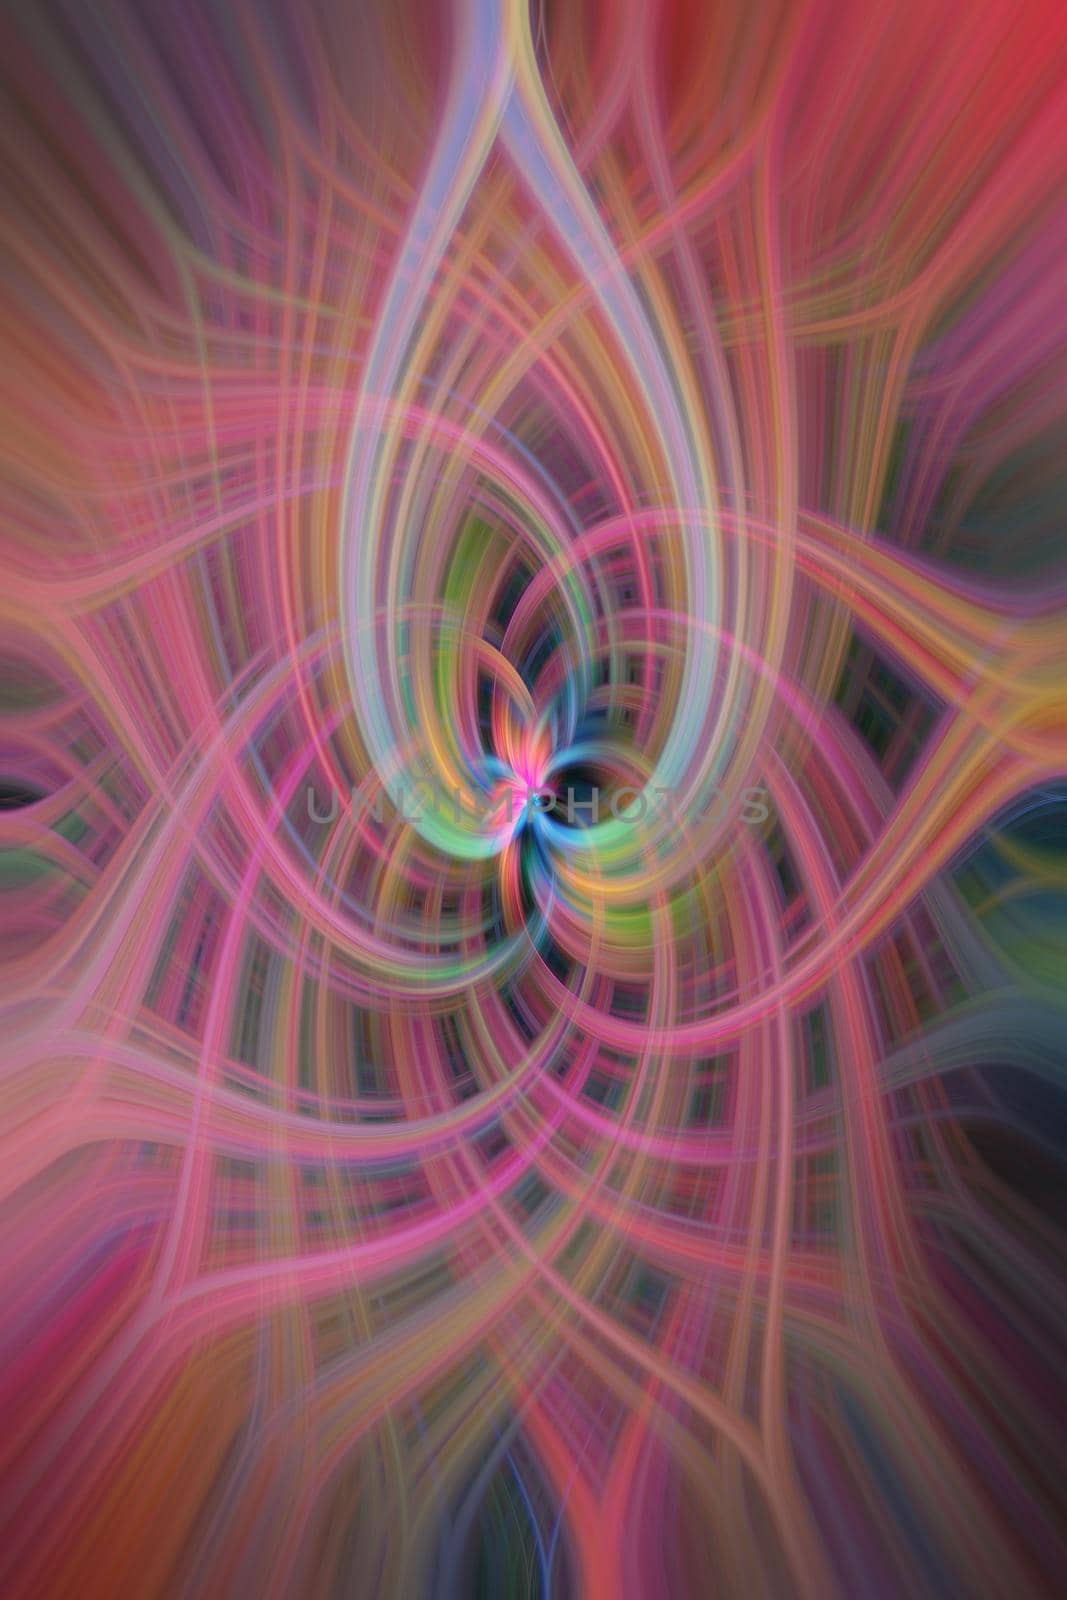 Abstract photograph with pastel colors of pink, blue, purple, and green.